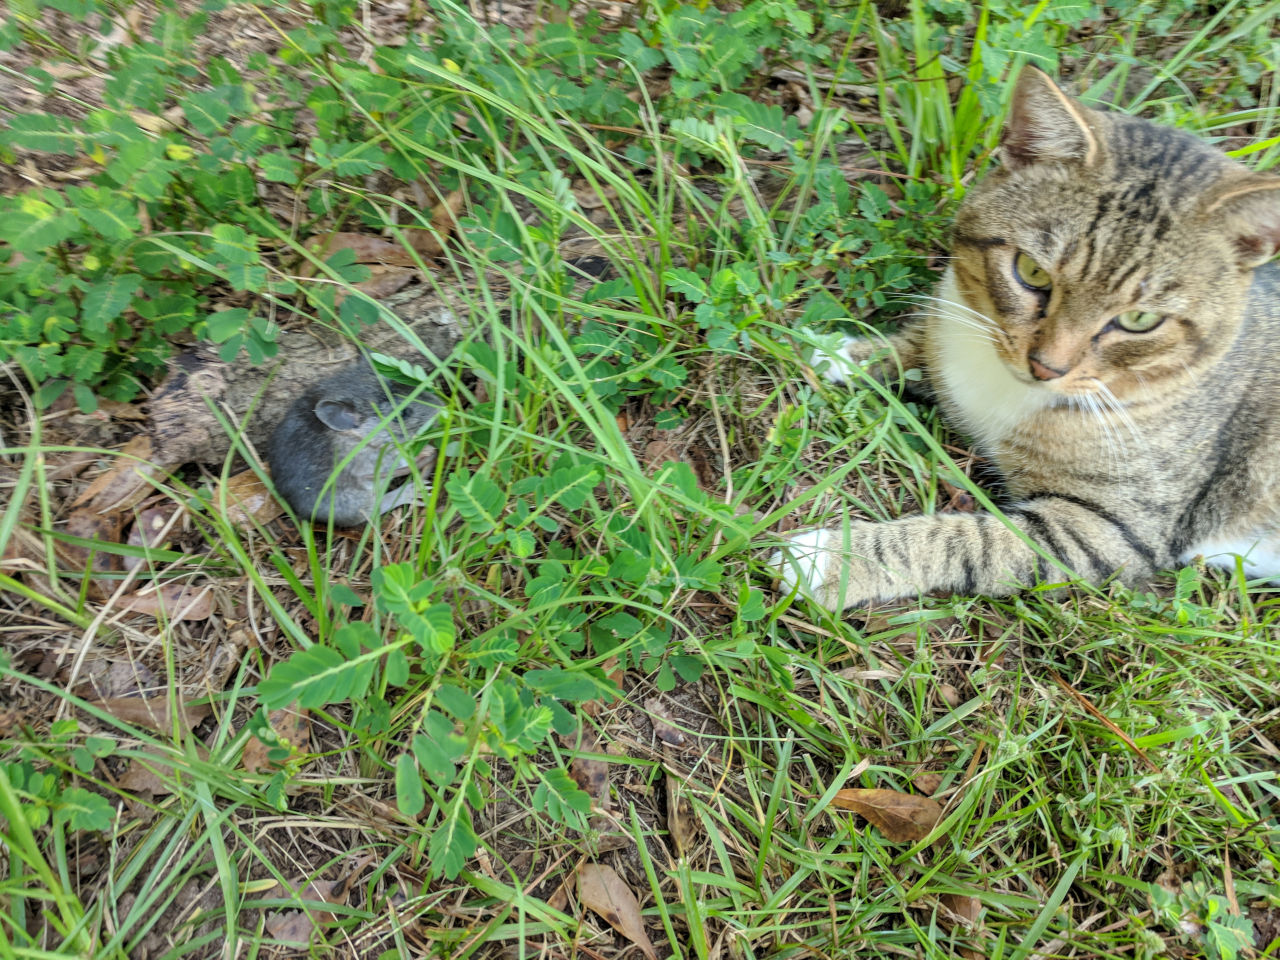 Tom, a tabby cat with a white underside, lying next to a mouse in the grass.